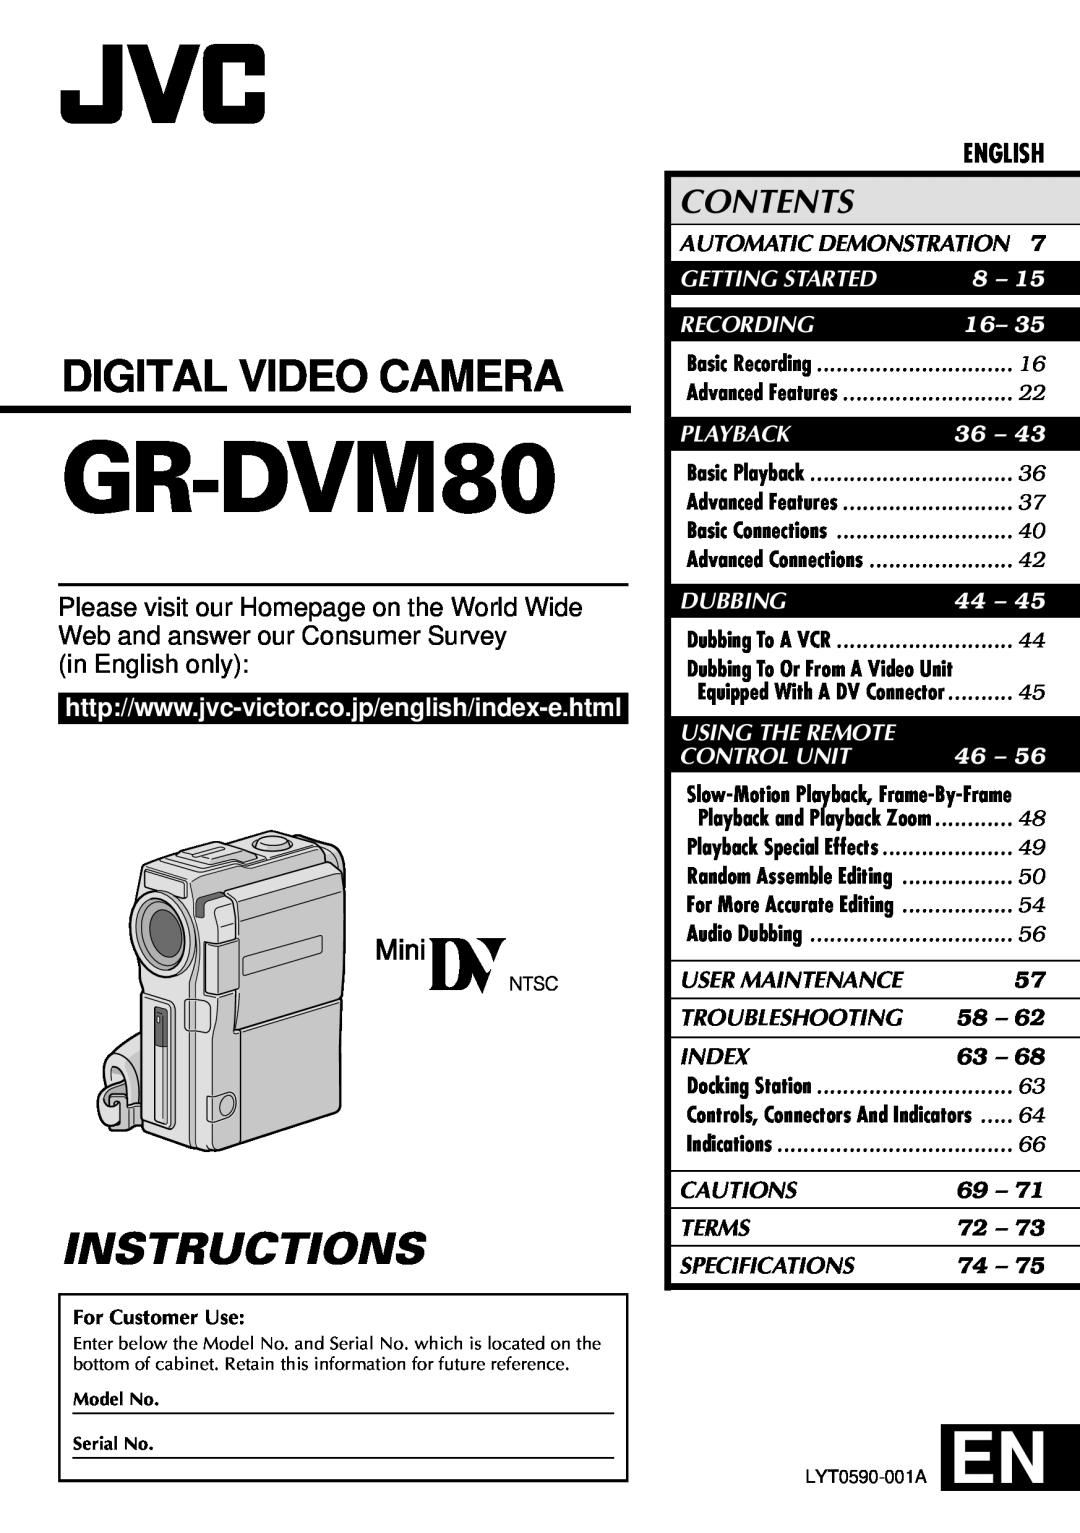 JVC GRDVM80U specifications in English only, User Maintenance, Troubleshooting, Index, Cautions, Terms, Specifications 